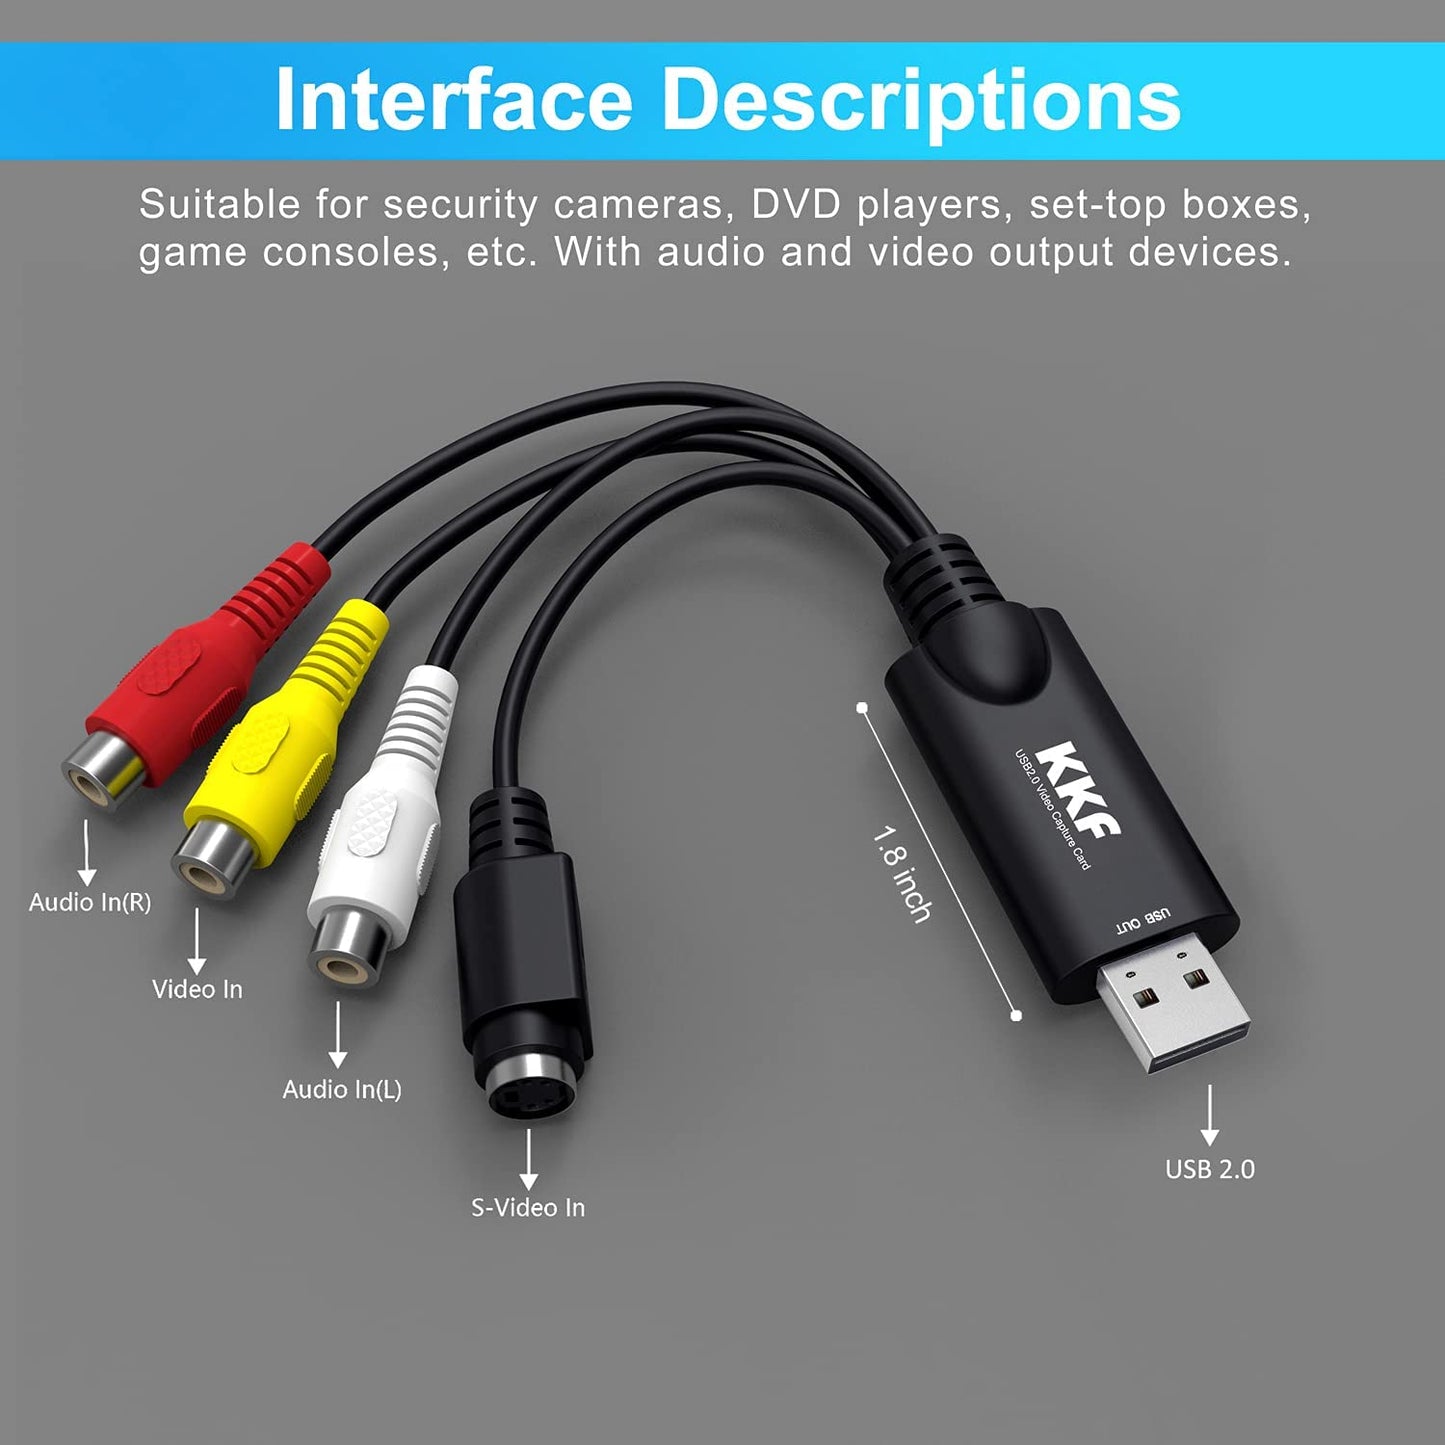 USB 2.0 Video Capture Card, Audio Video Converter Grabber Transfer VHS VCR TV to DVD Capture Analog Video to Digital for Windows 7 8 10 PC Mac OS